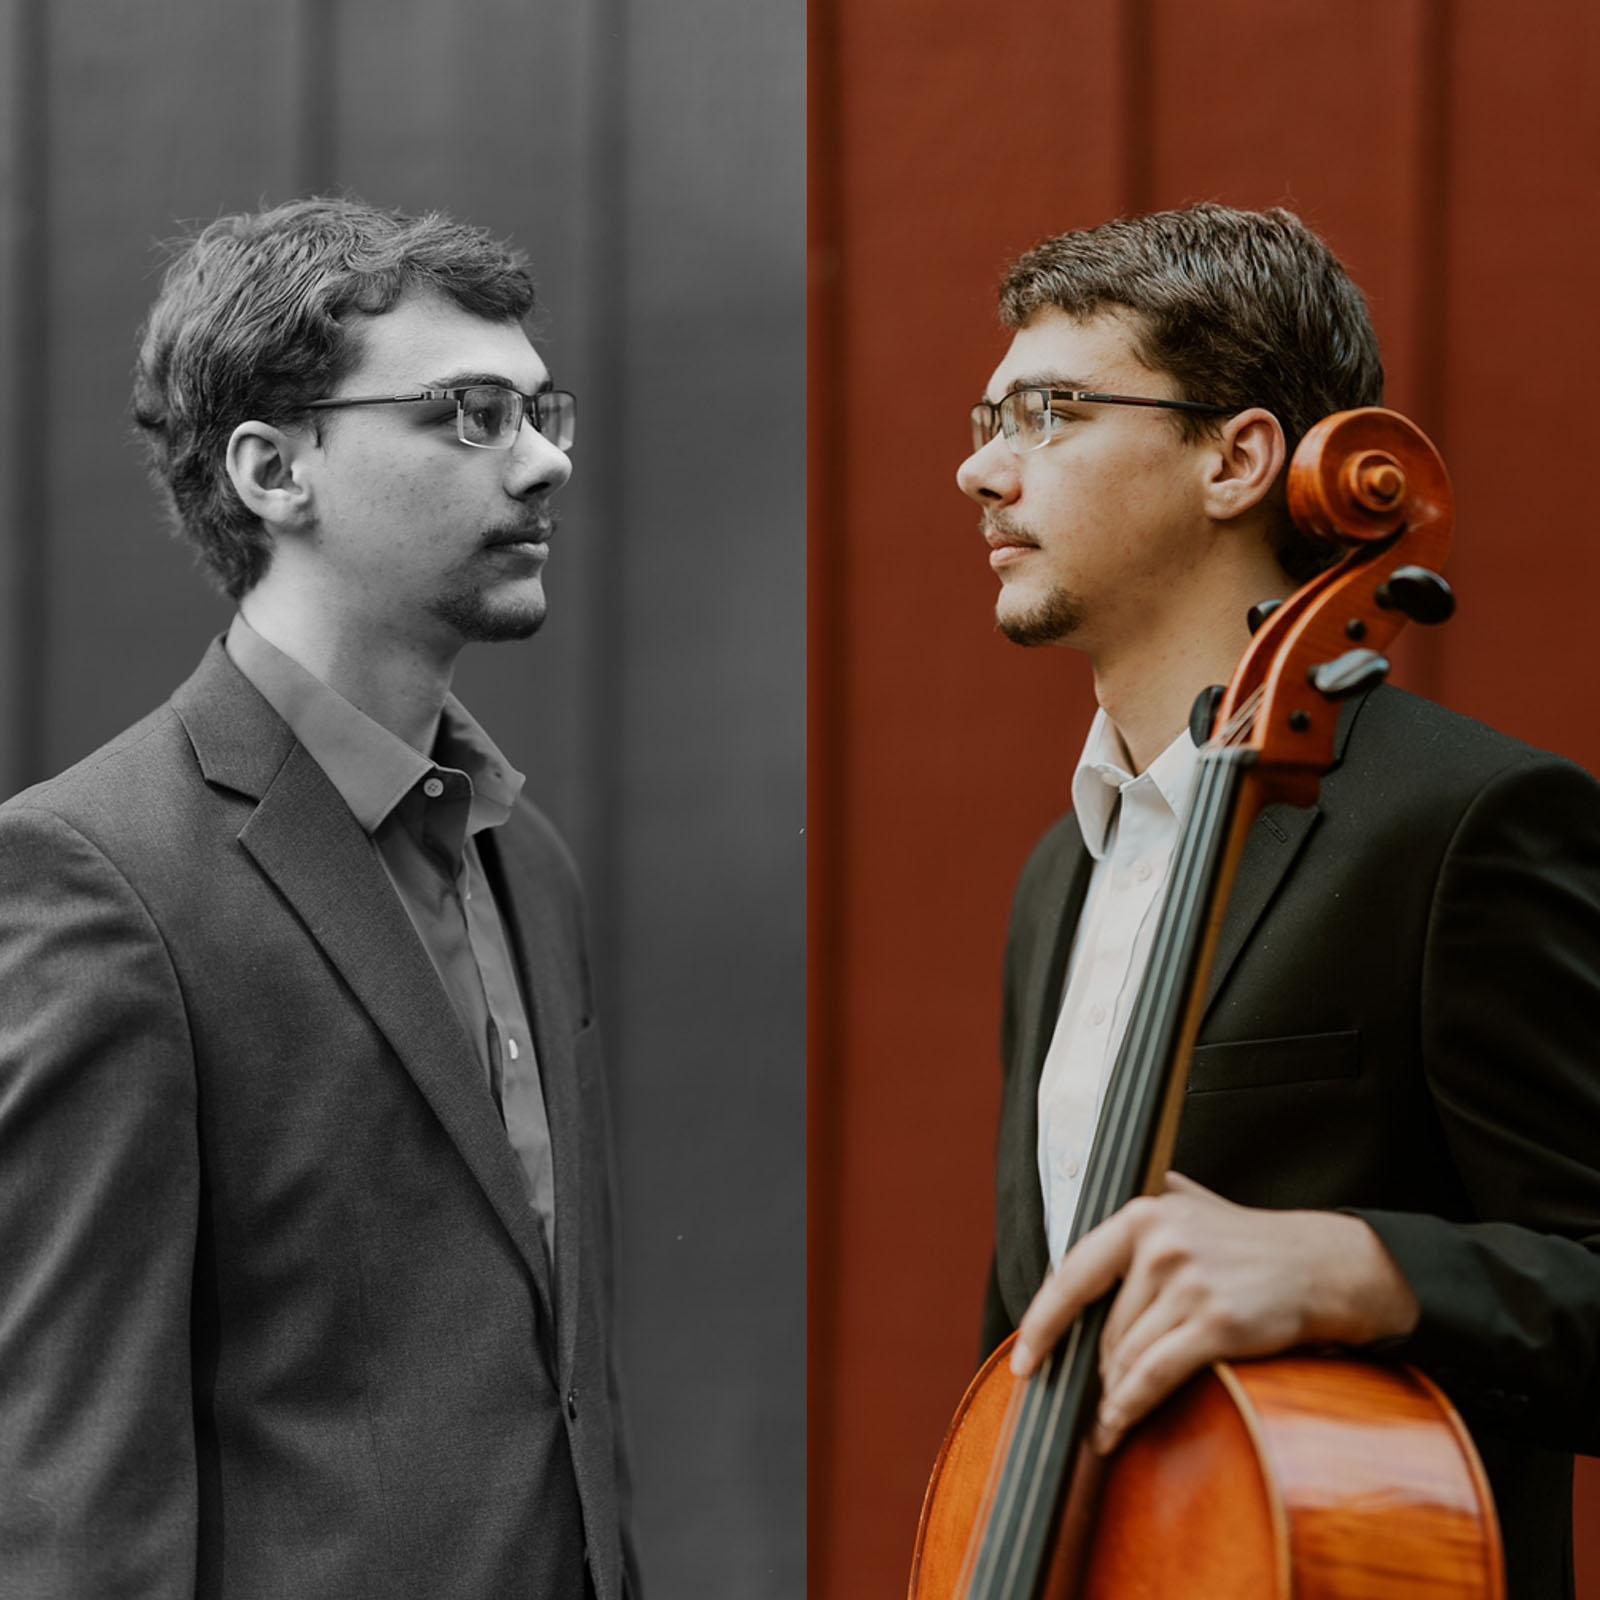 an almost mirror image of a person with glasses facing themselves, one side is black and white, the facing version is color. The color version holds a cello, the black and white version is empty-handed.